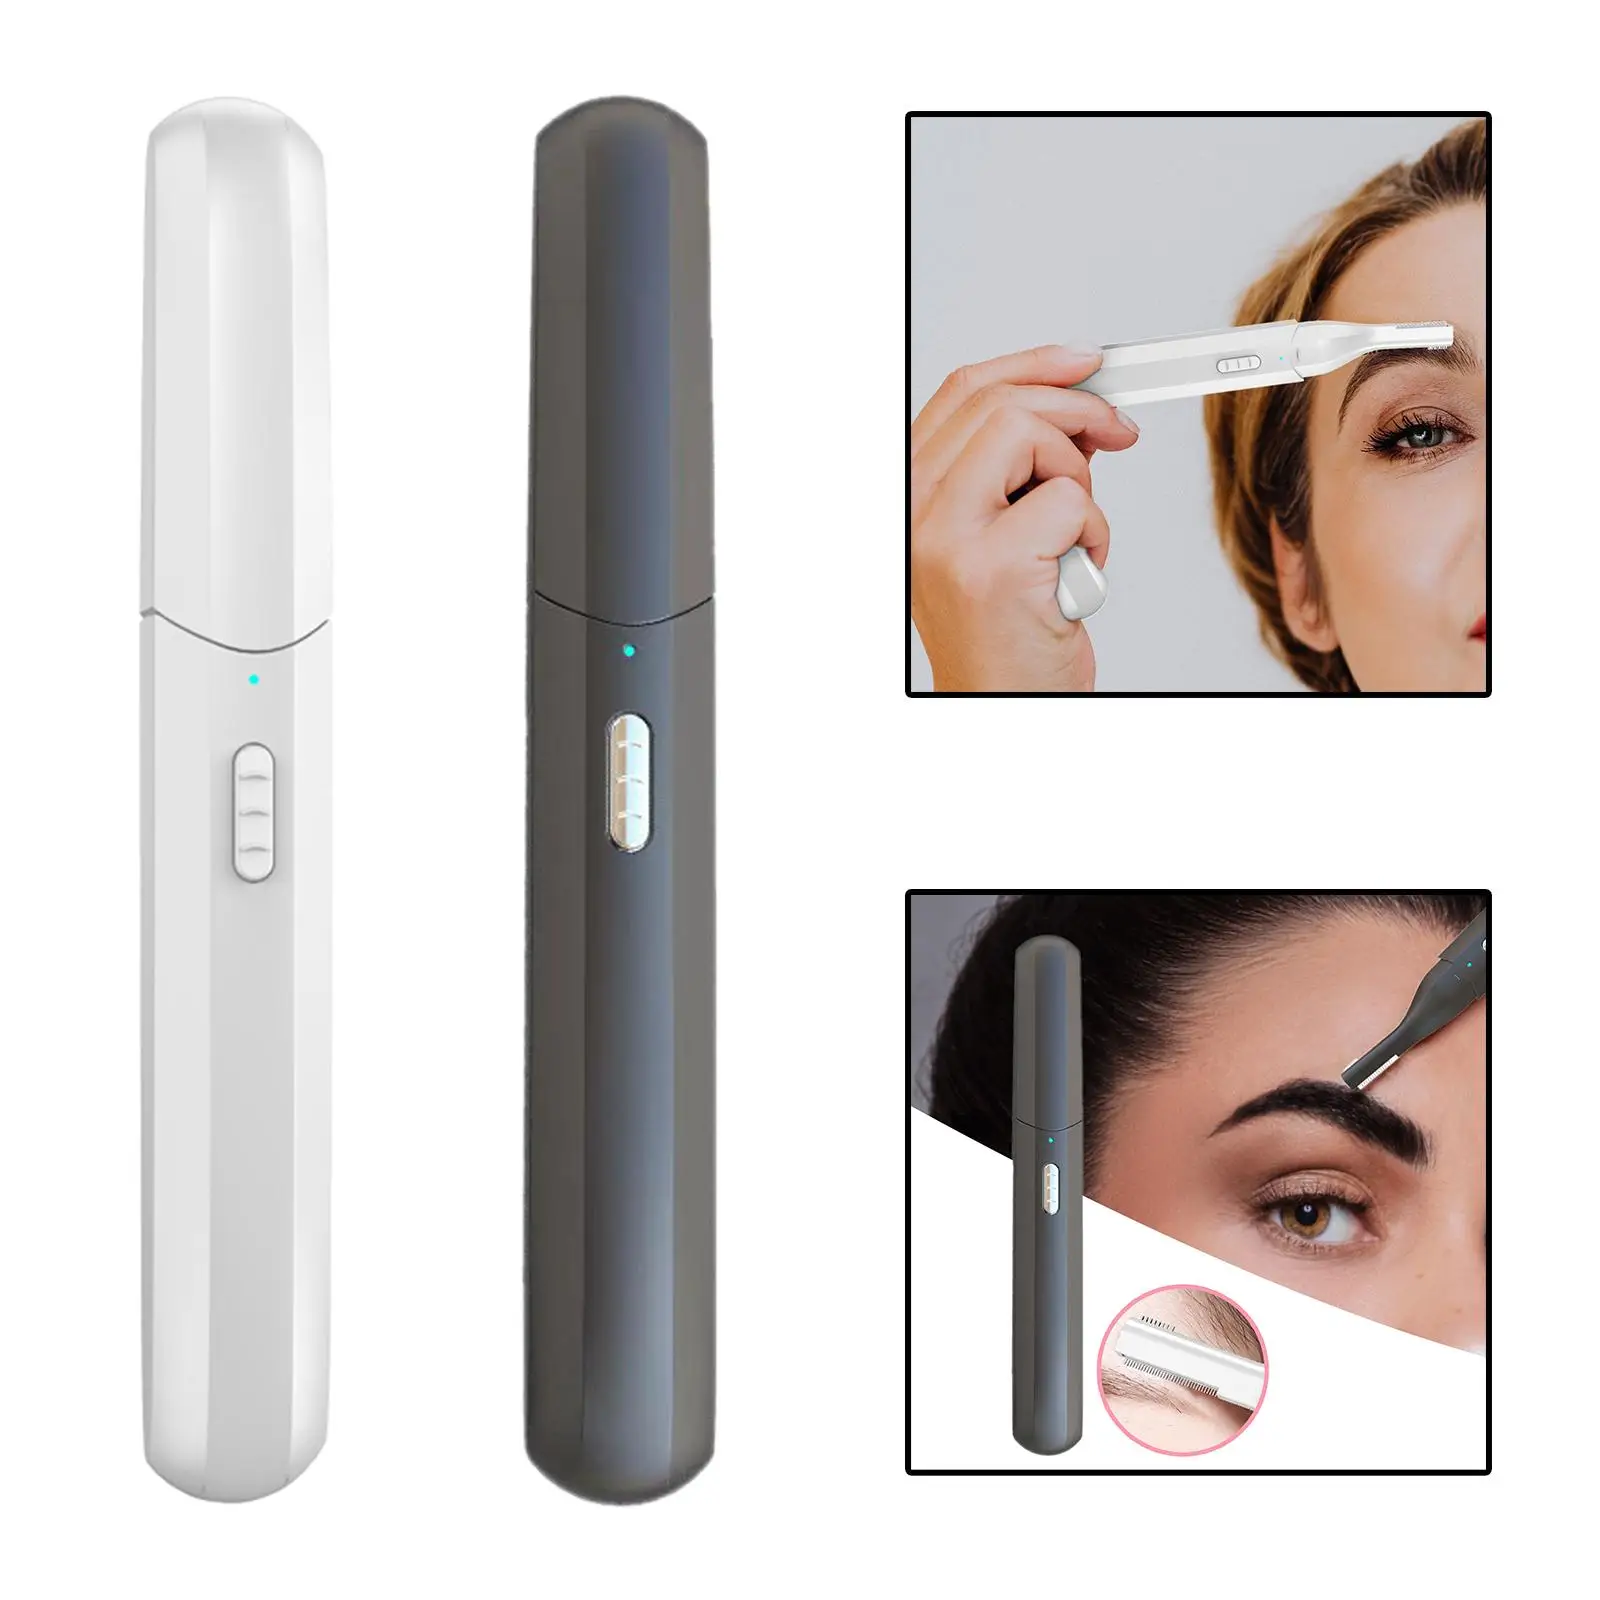 Electric Eyebrow trimming Precision Cutting Hair Removal Tool Facial Shaving Tool with Dual Cutter Head for Lips Arms